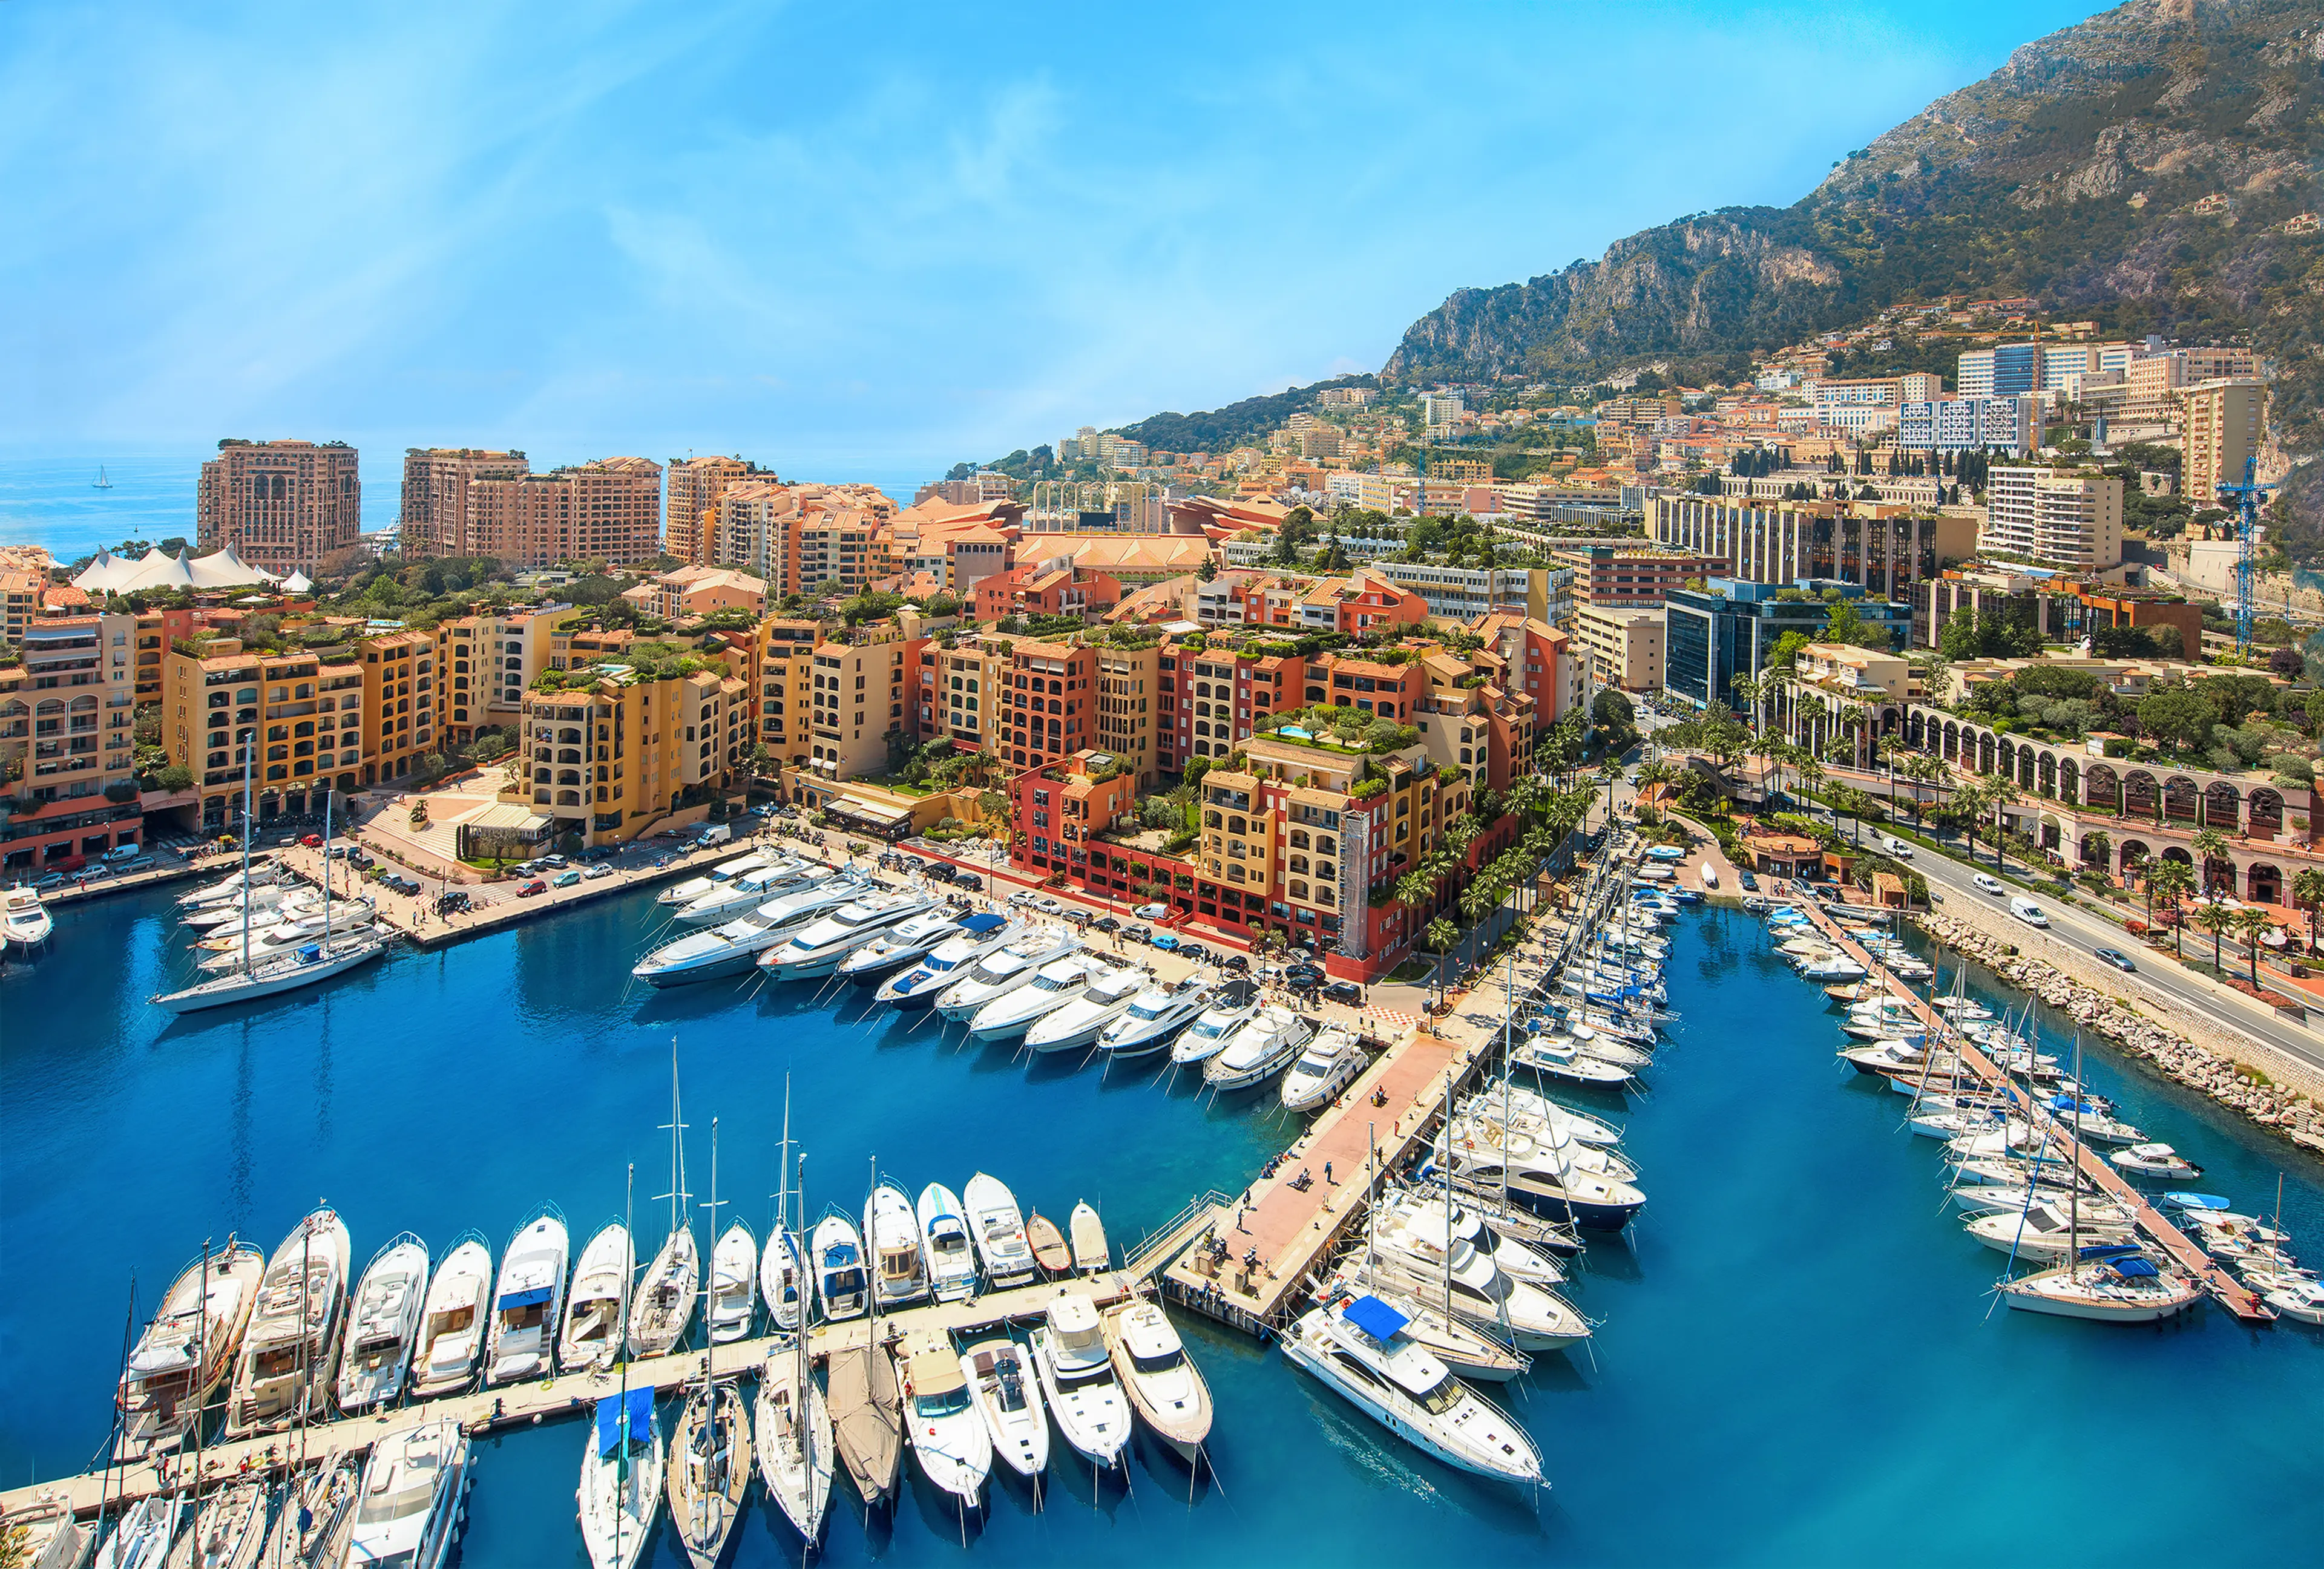 Solo Day Excursion: Shopping, Food and Wine in Monaco